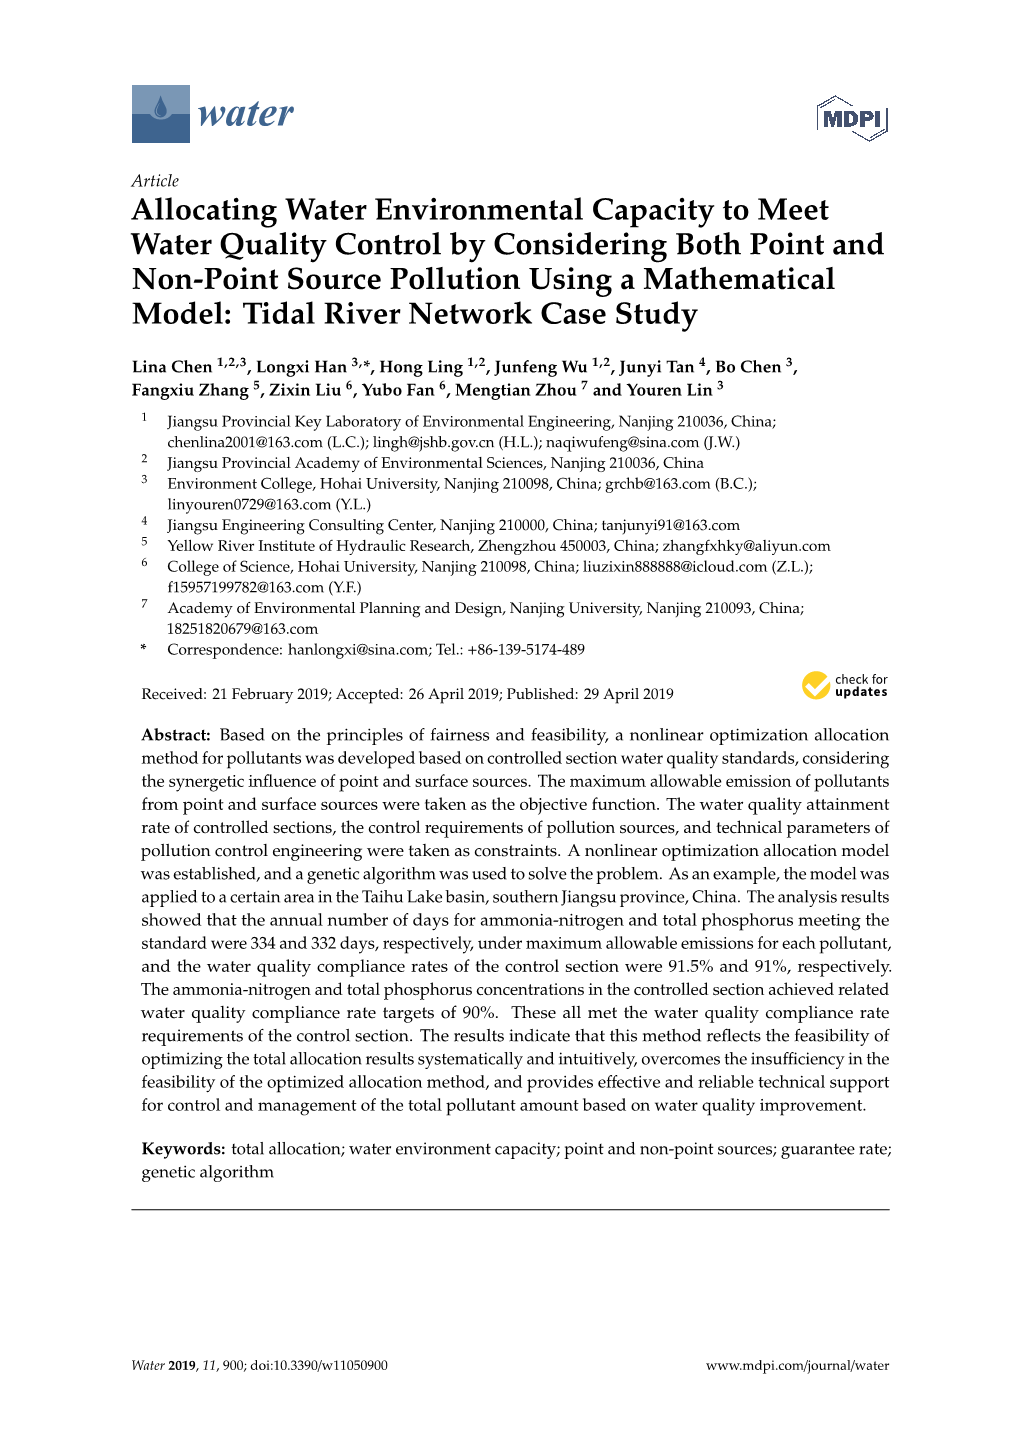 Allocating Water Environmental Capacity to Meet Water Quality Control by Considering Both Point and Non-Point Source Pollution U